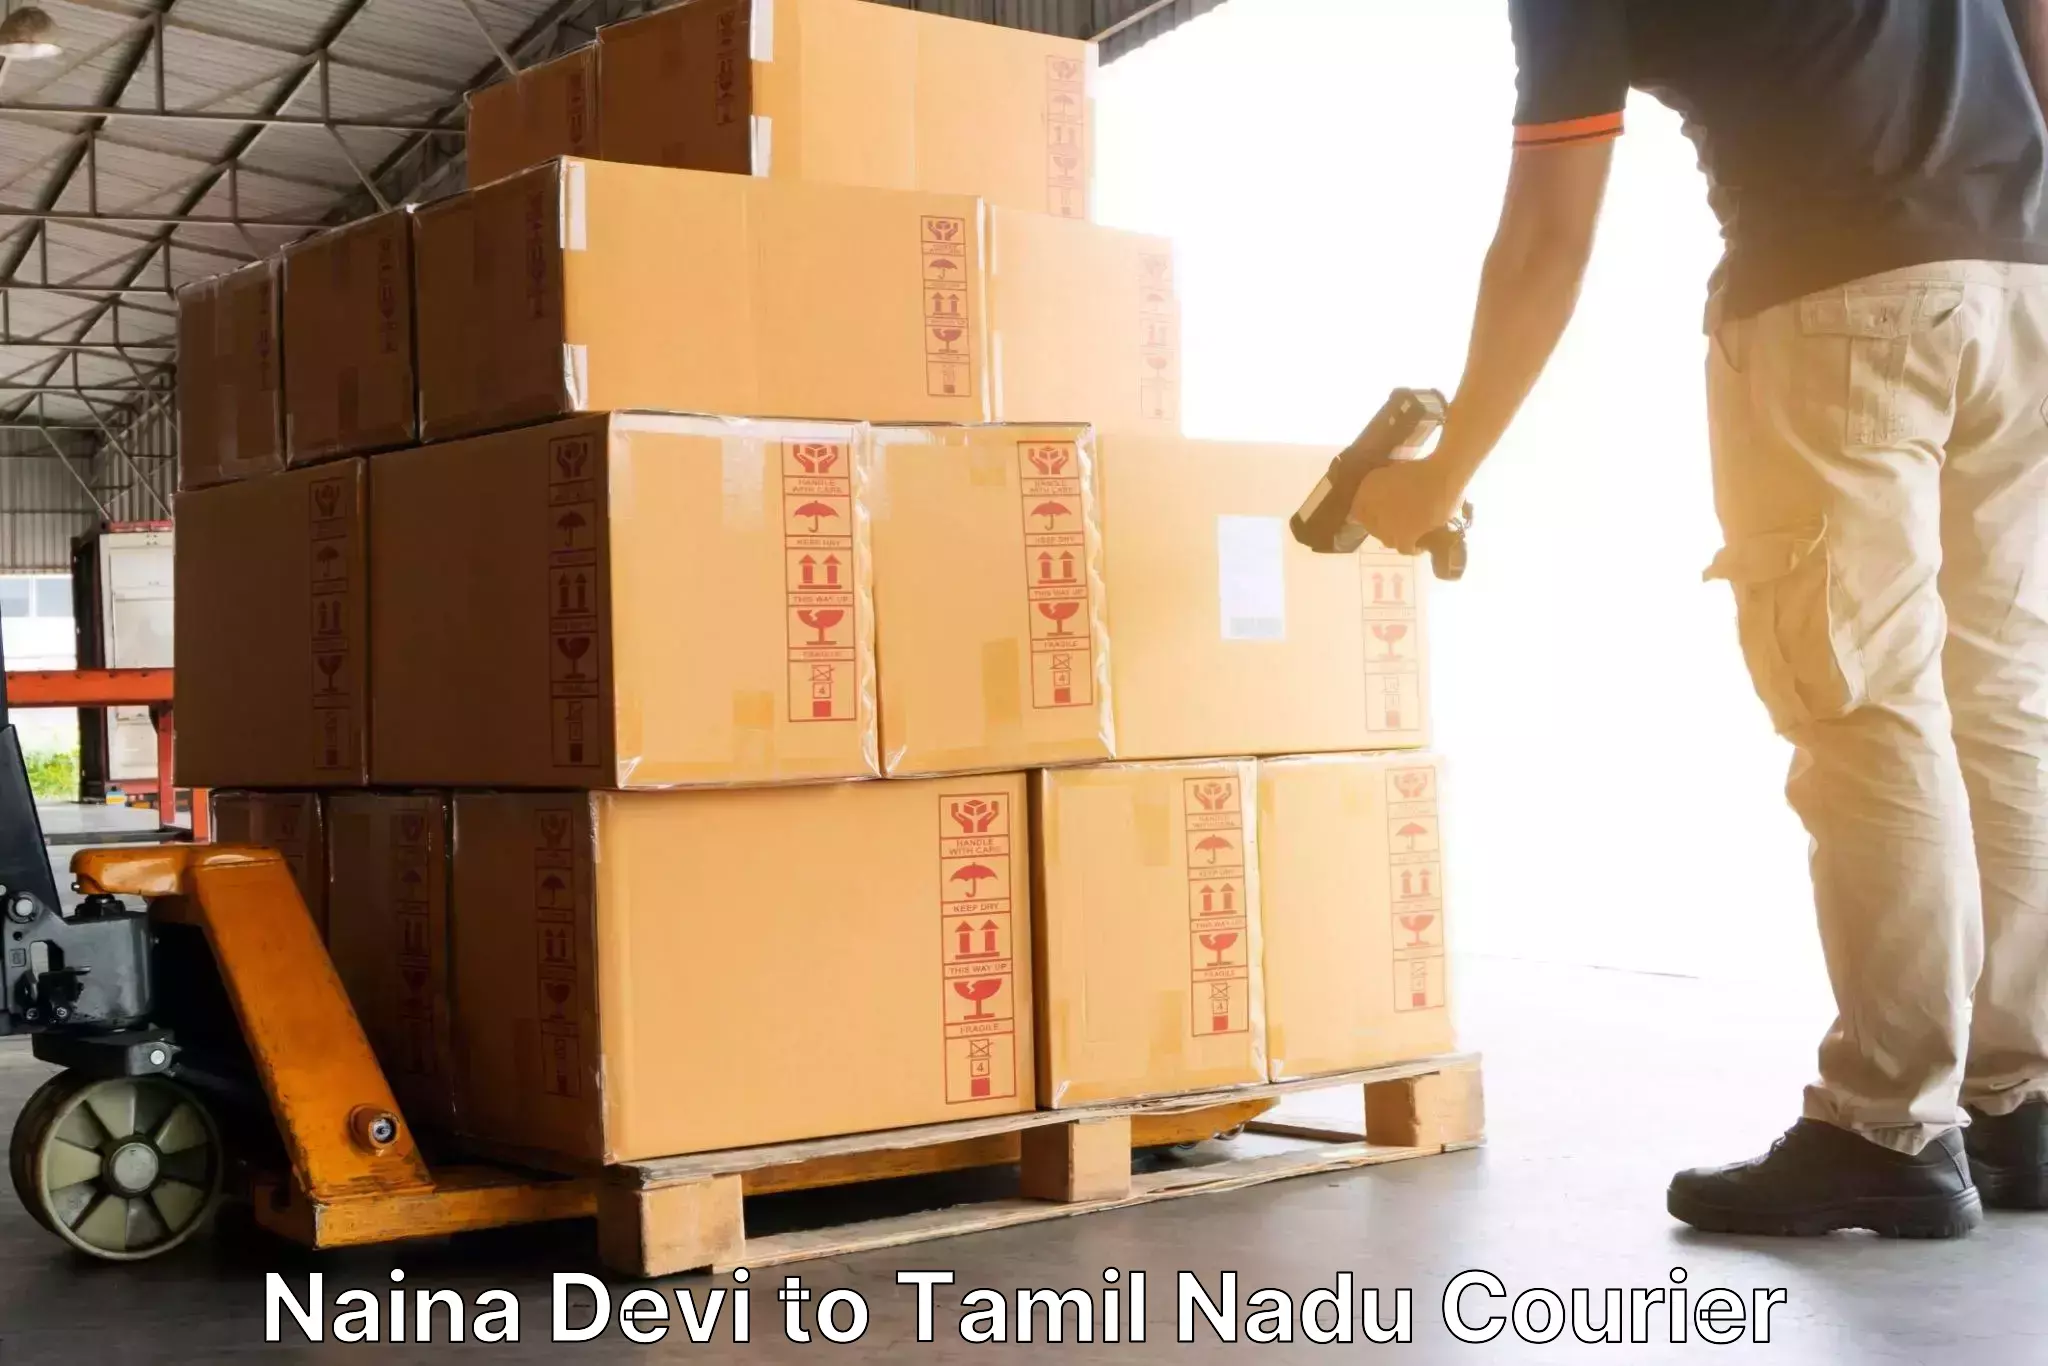 Flexible delivery schedules Naina Devi to Tamil Nadu